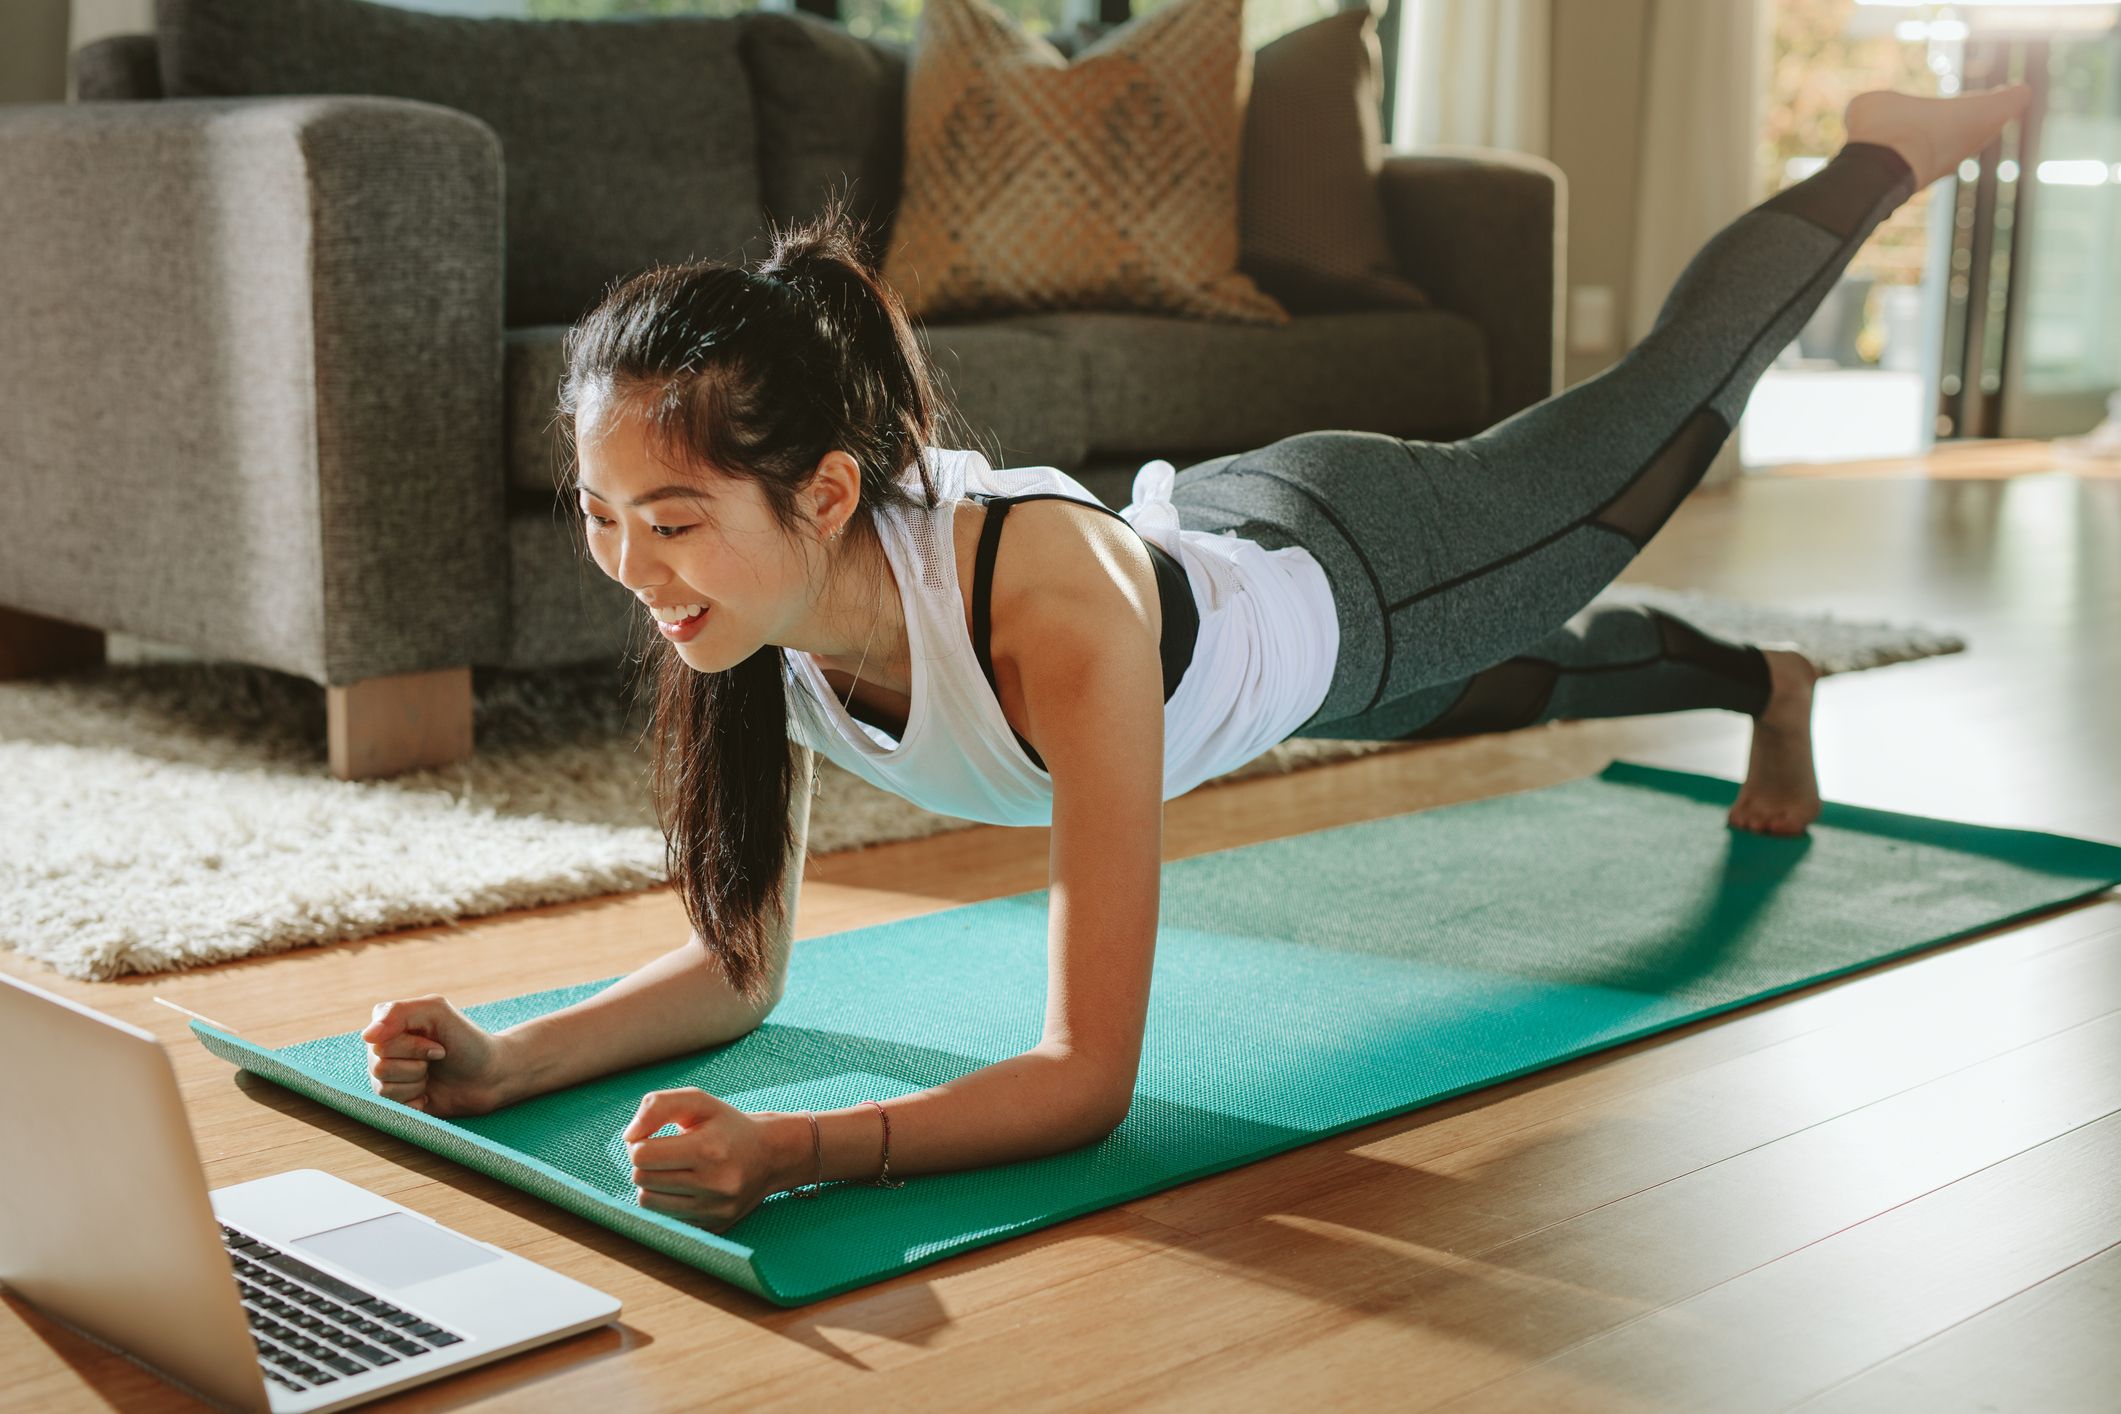 How to Start Working Out at Home